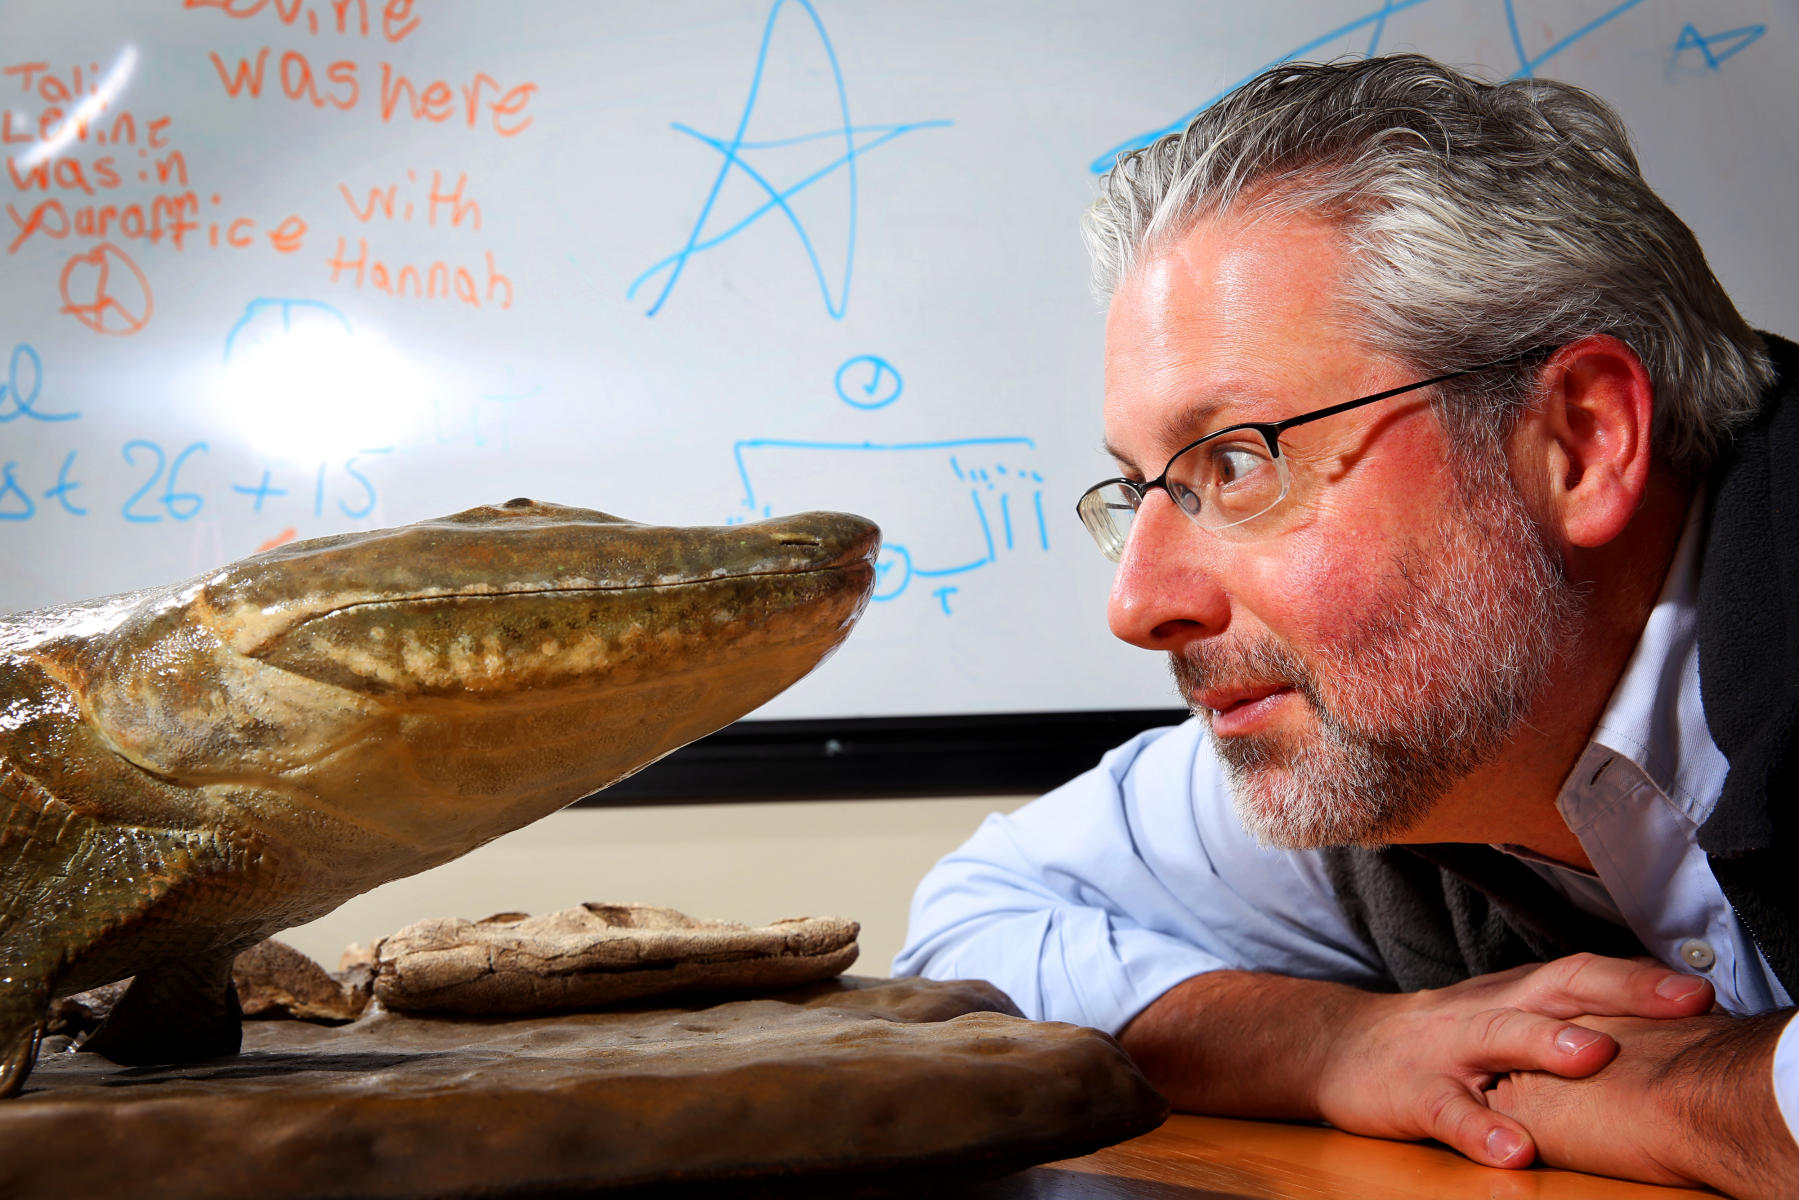 Professor Neil Shubin, author of "The Universe Within," is photographed in his office at the University of Chicago with his discovery Tiktaalik roseae. : People : Madison | Milwaukee | Chicago | Writer | Photographer | Keri Wiginton | Portrait photography | Travel | Corporate | Photojournalist | Editorial | Environmental